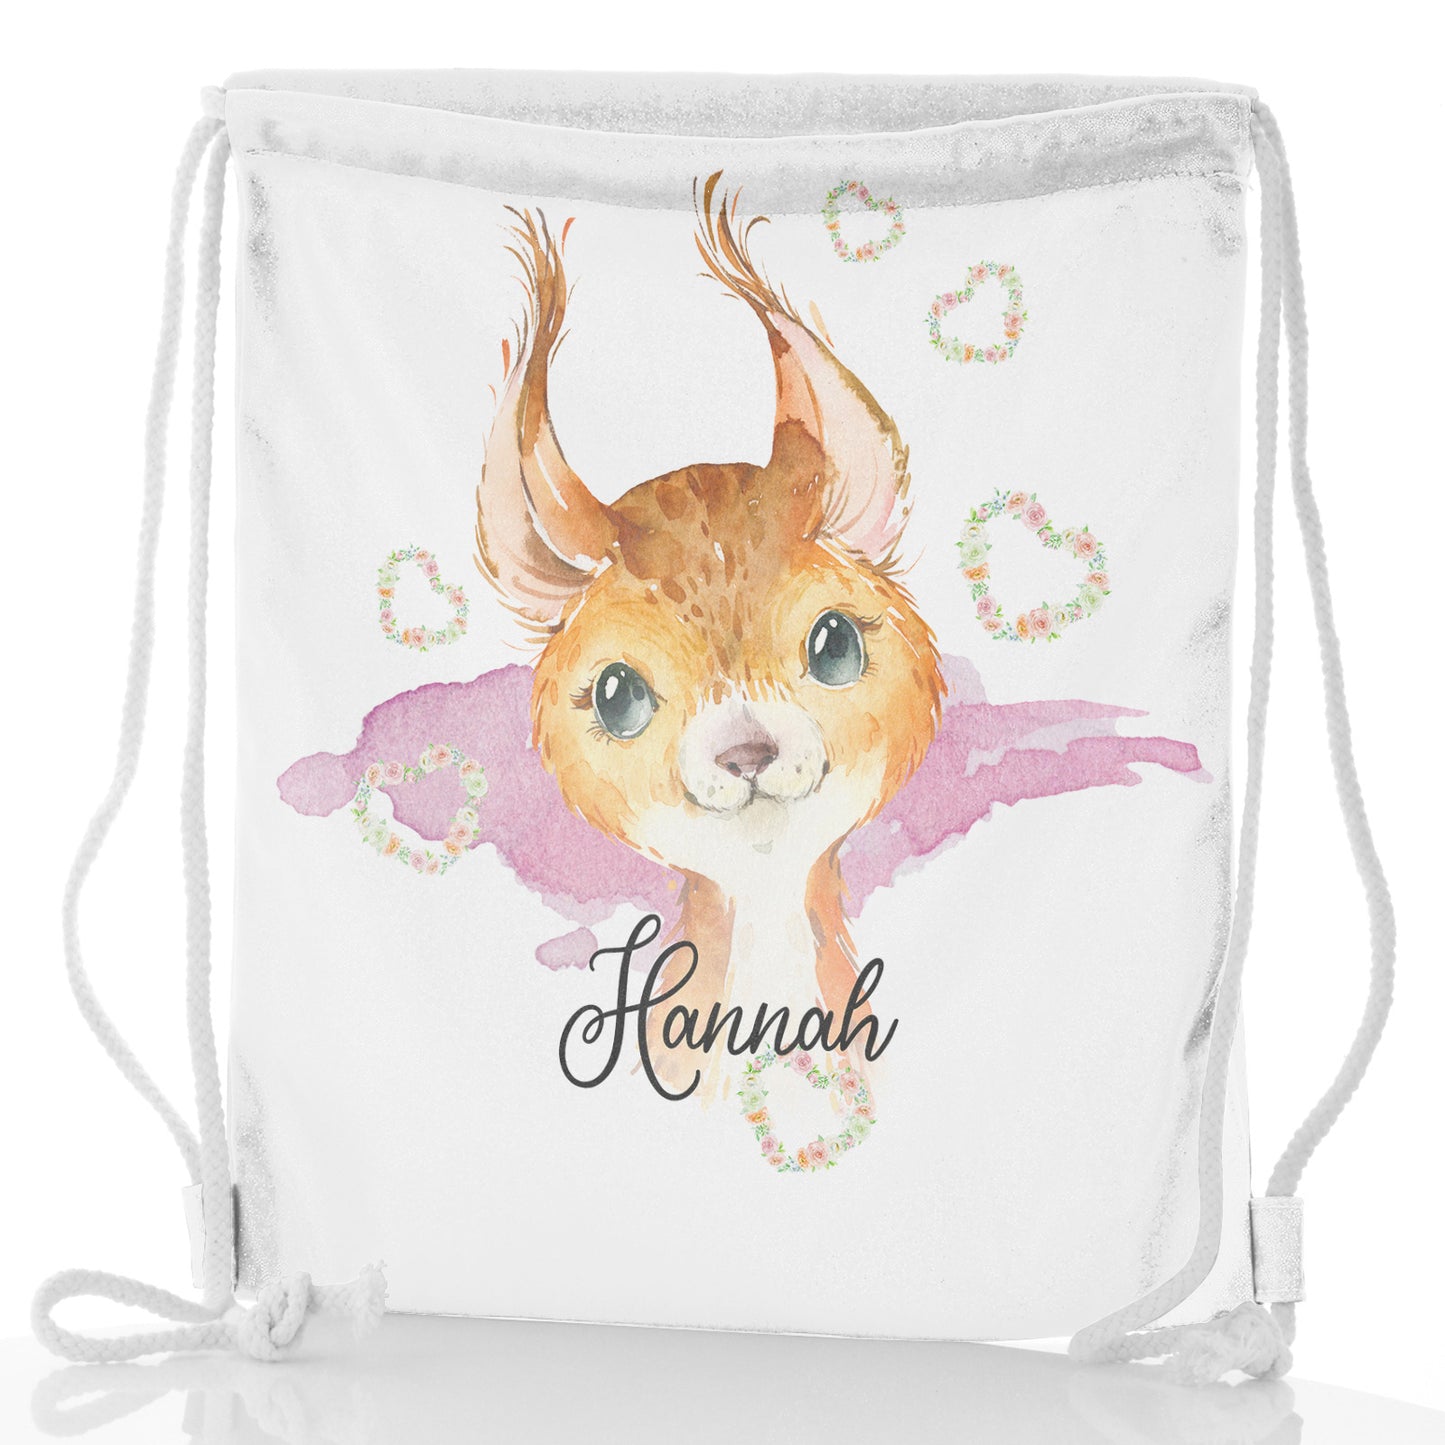 Personalised Glitter Drawstring Backpack with Red squirrel Heart Wreaths and Cute Text